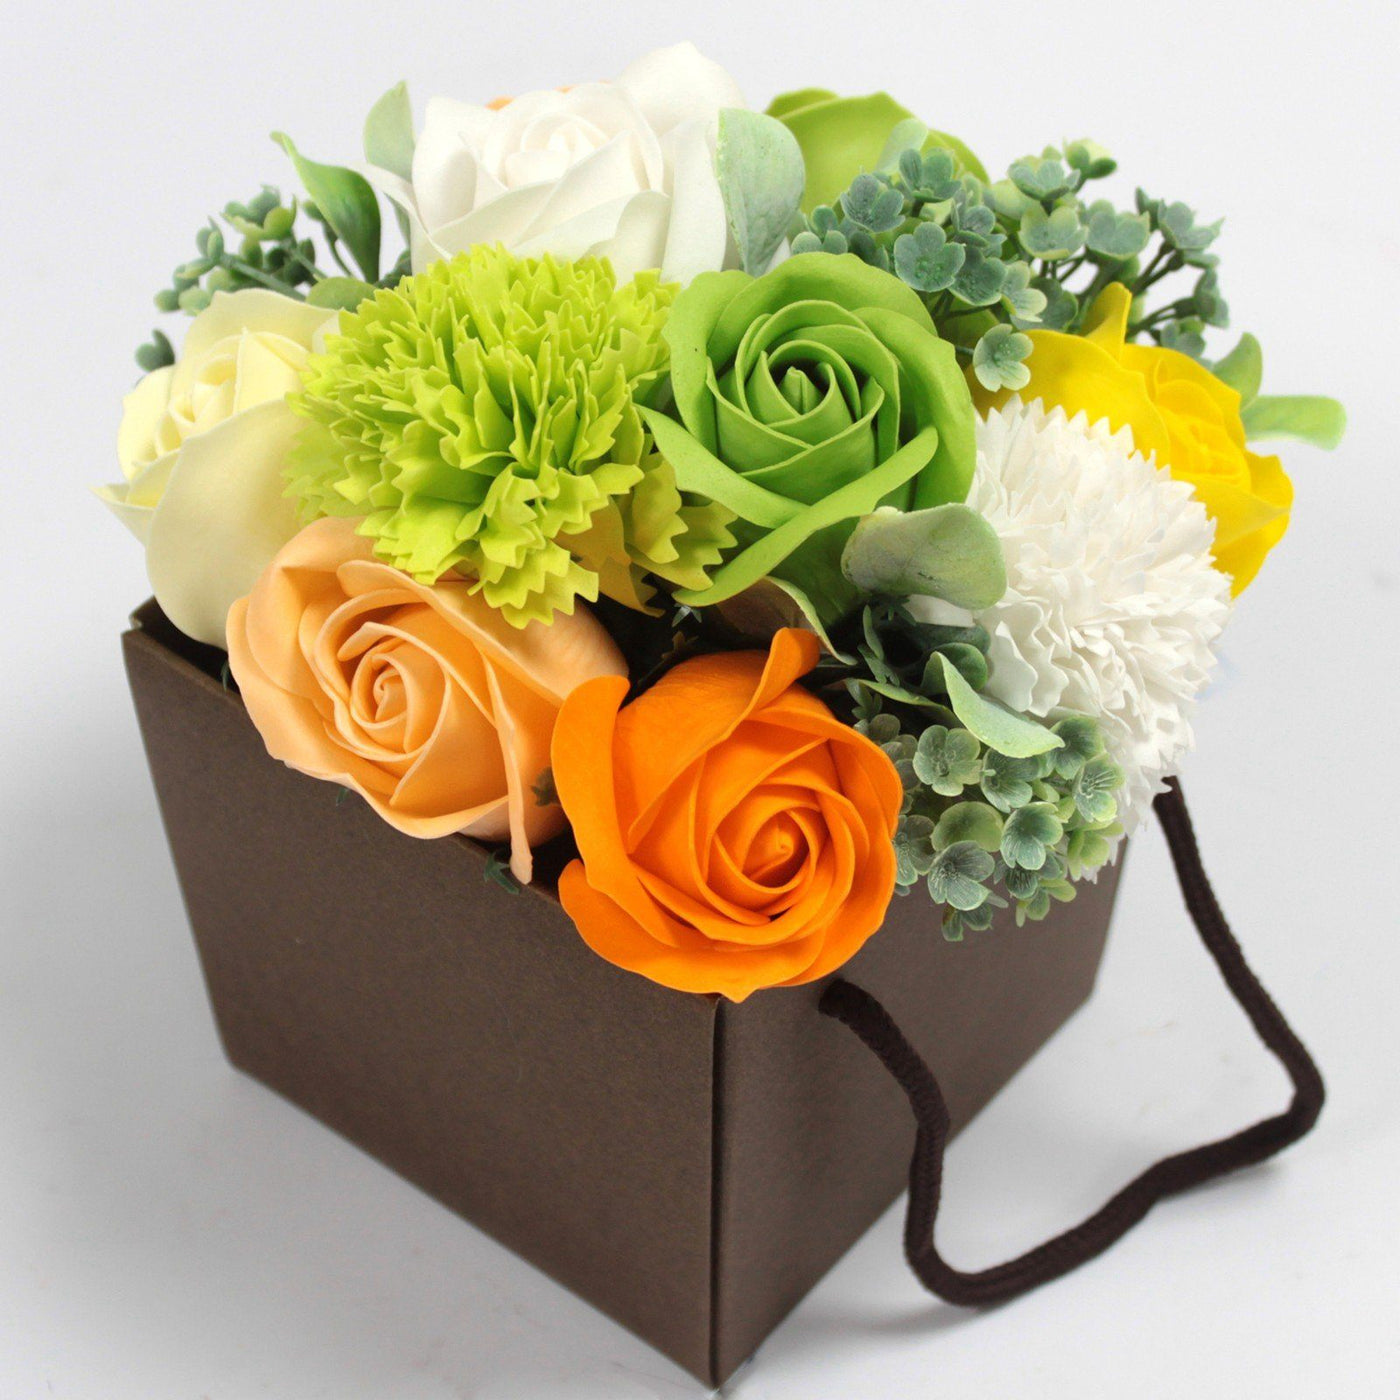 Body Soap Flower Bouquet In Gift Box - Spring Flowers, Orange, Green, Yellow, White